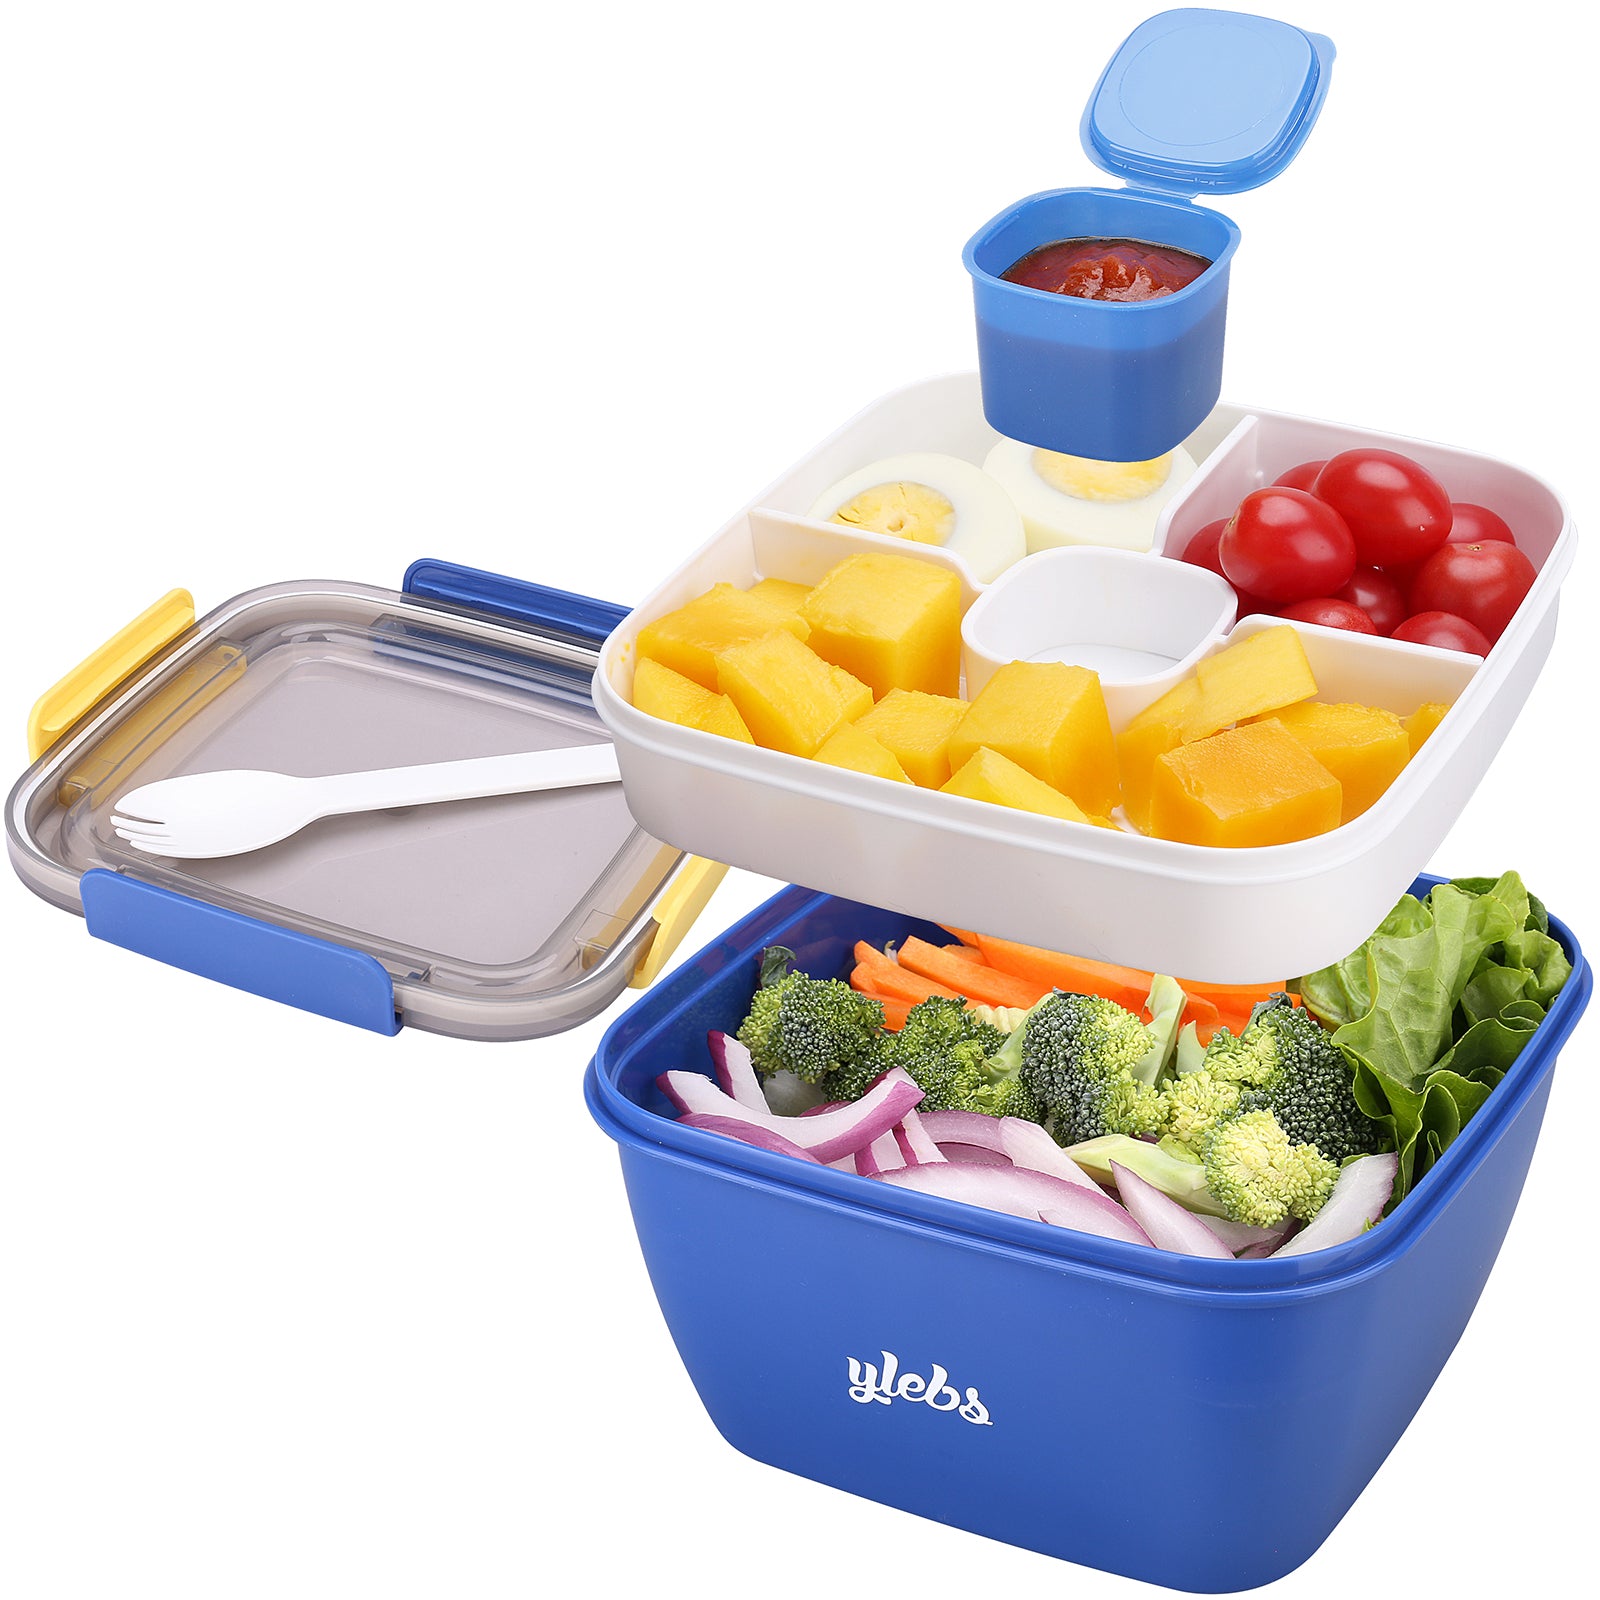 BOKZEN Freezer Bento Box, Salad Lunch Containers with Built-In Ice Pack &  Fork for Food Freshness, 1…See more BOKZEN Freezer Bento Box, Salad Lunch